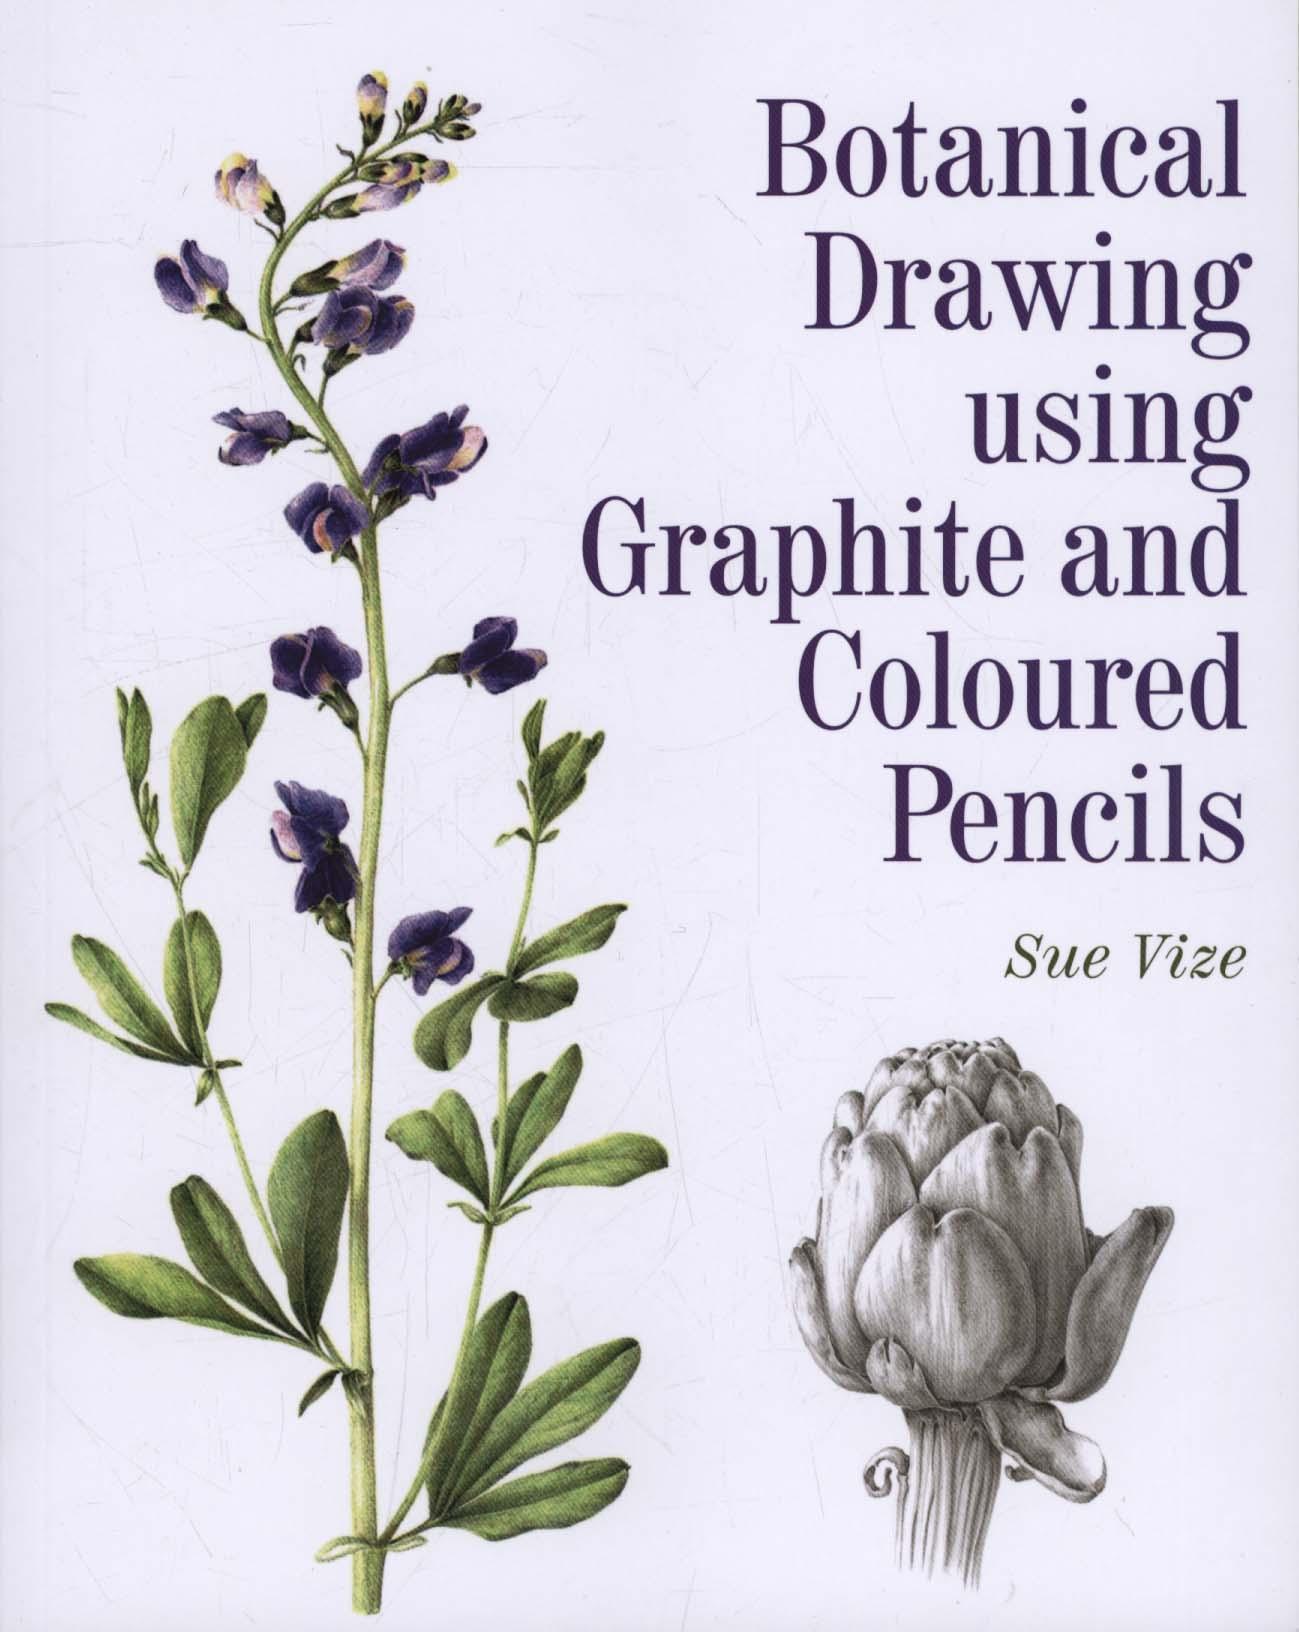 Botanical Drawing using Graphite and Coloured Pencils - Sue Vize